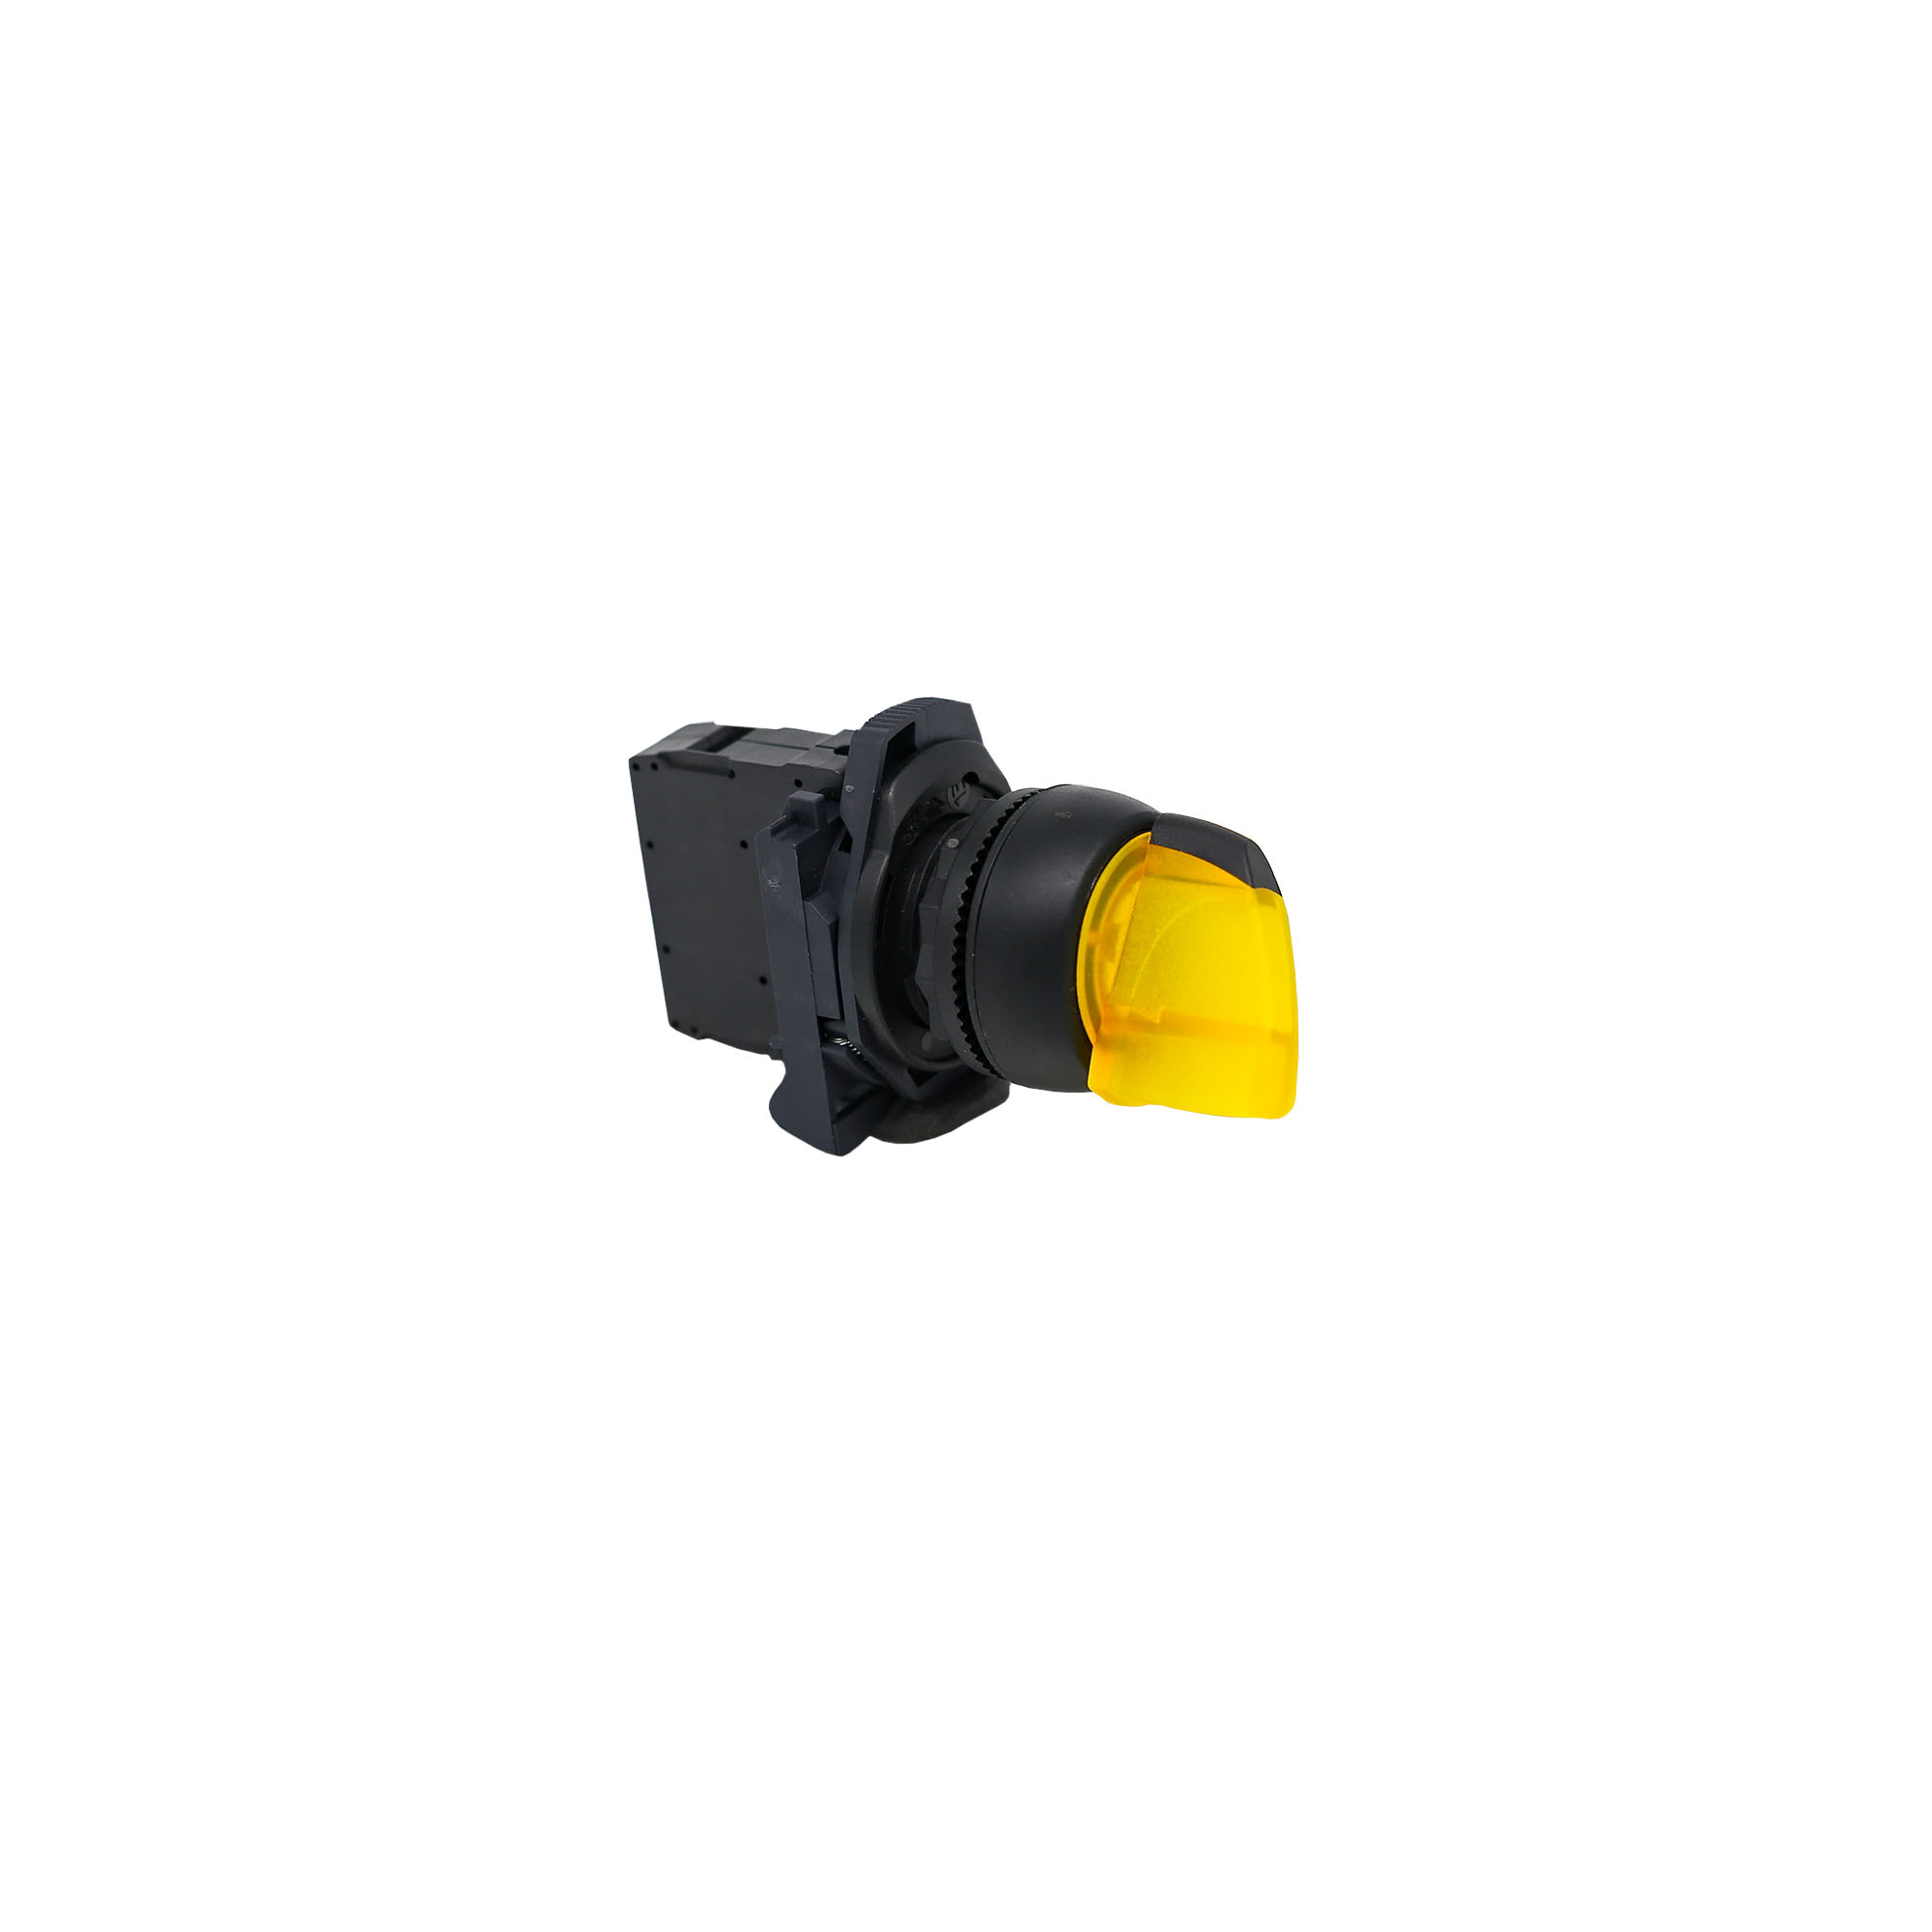 Parts Washer Replacement Parts, Parts & Accessories, Yellow Illuminated Selector 2-Position Contact Switch, 1792 Contact Switch, American Hawk Industrial, Dee-Blast